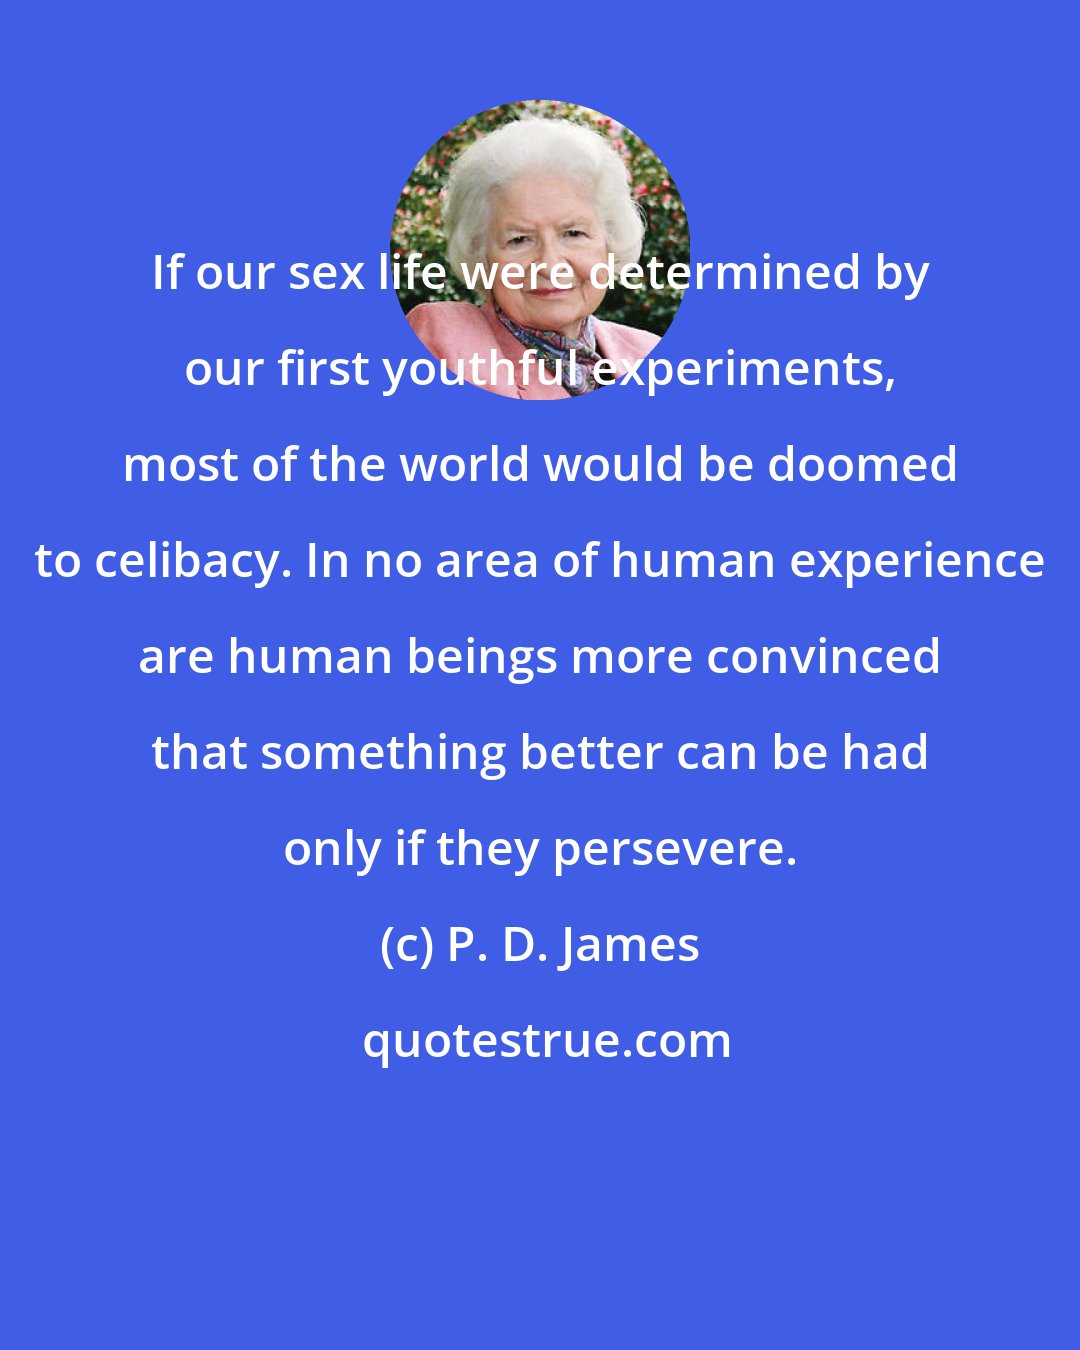 P. D. James: If our sex life were determined by our first youthful experiments, most of the world would be doomed to celibacy. In no area of human experience are human beings more convinced that something better can be had only if they persevere.